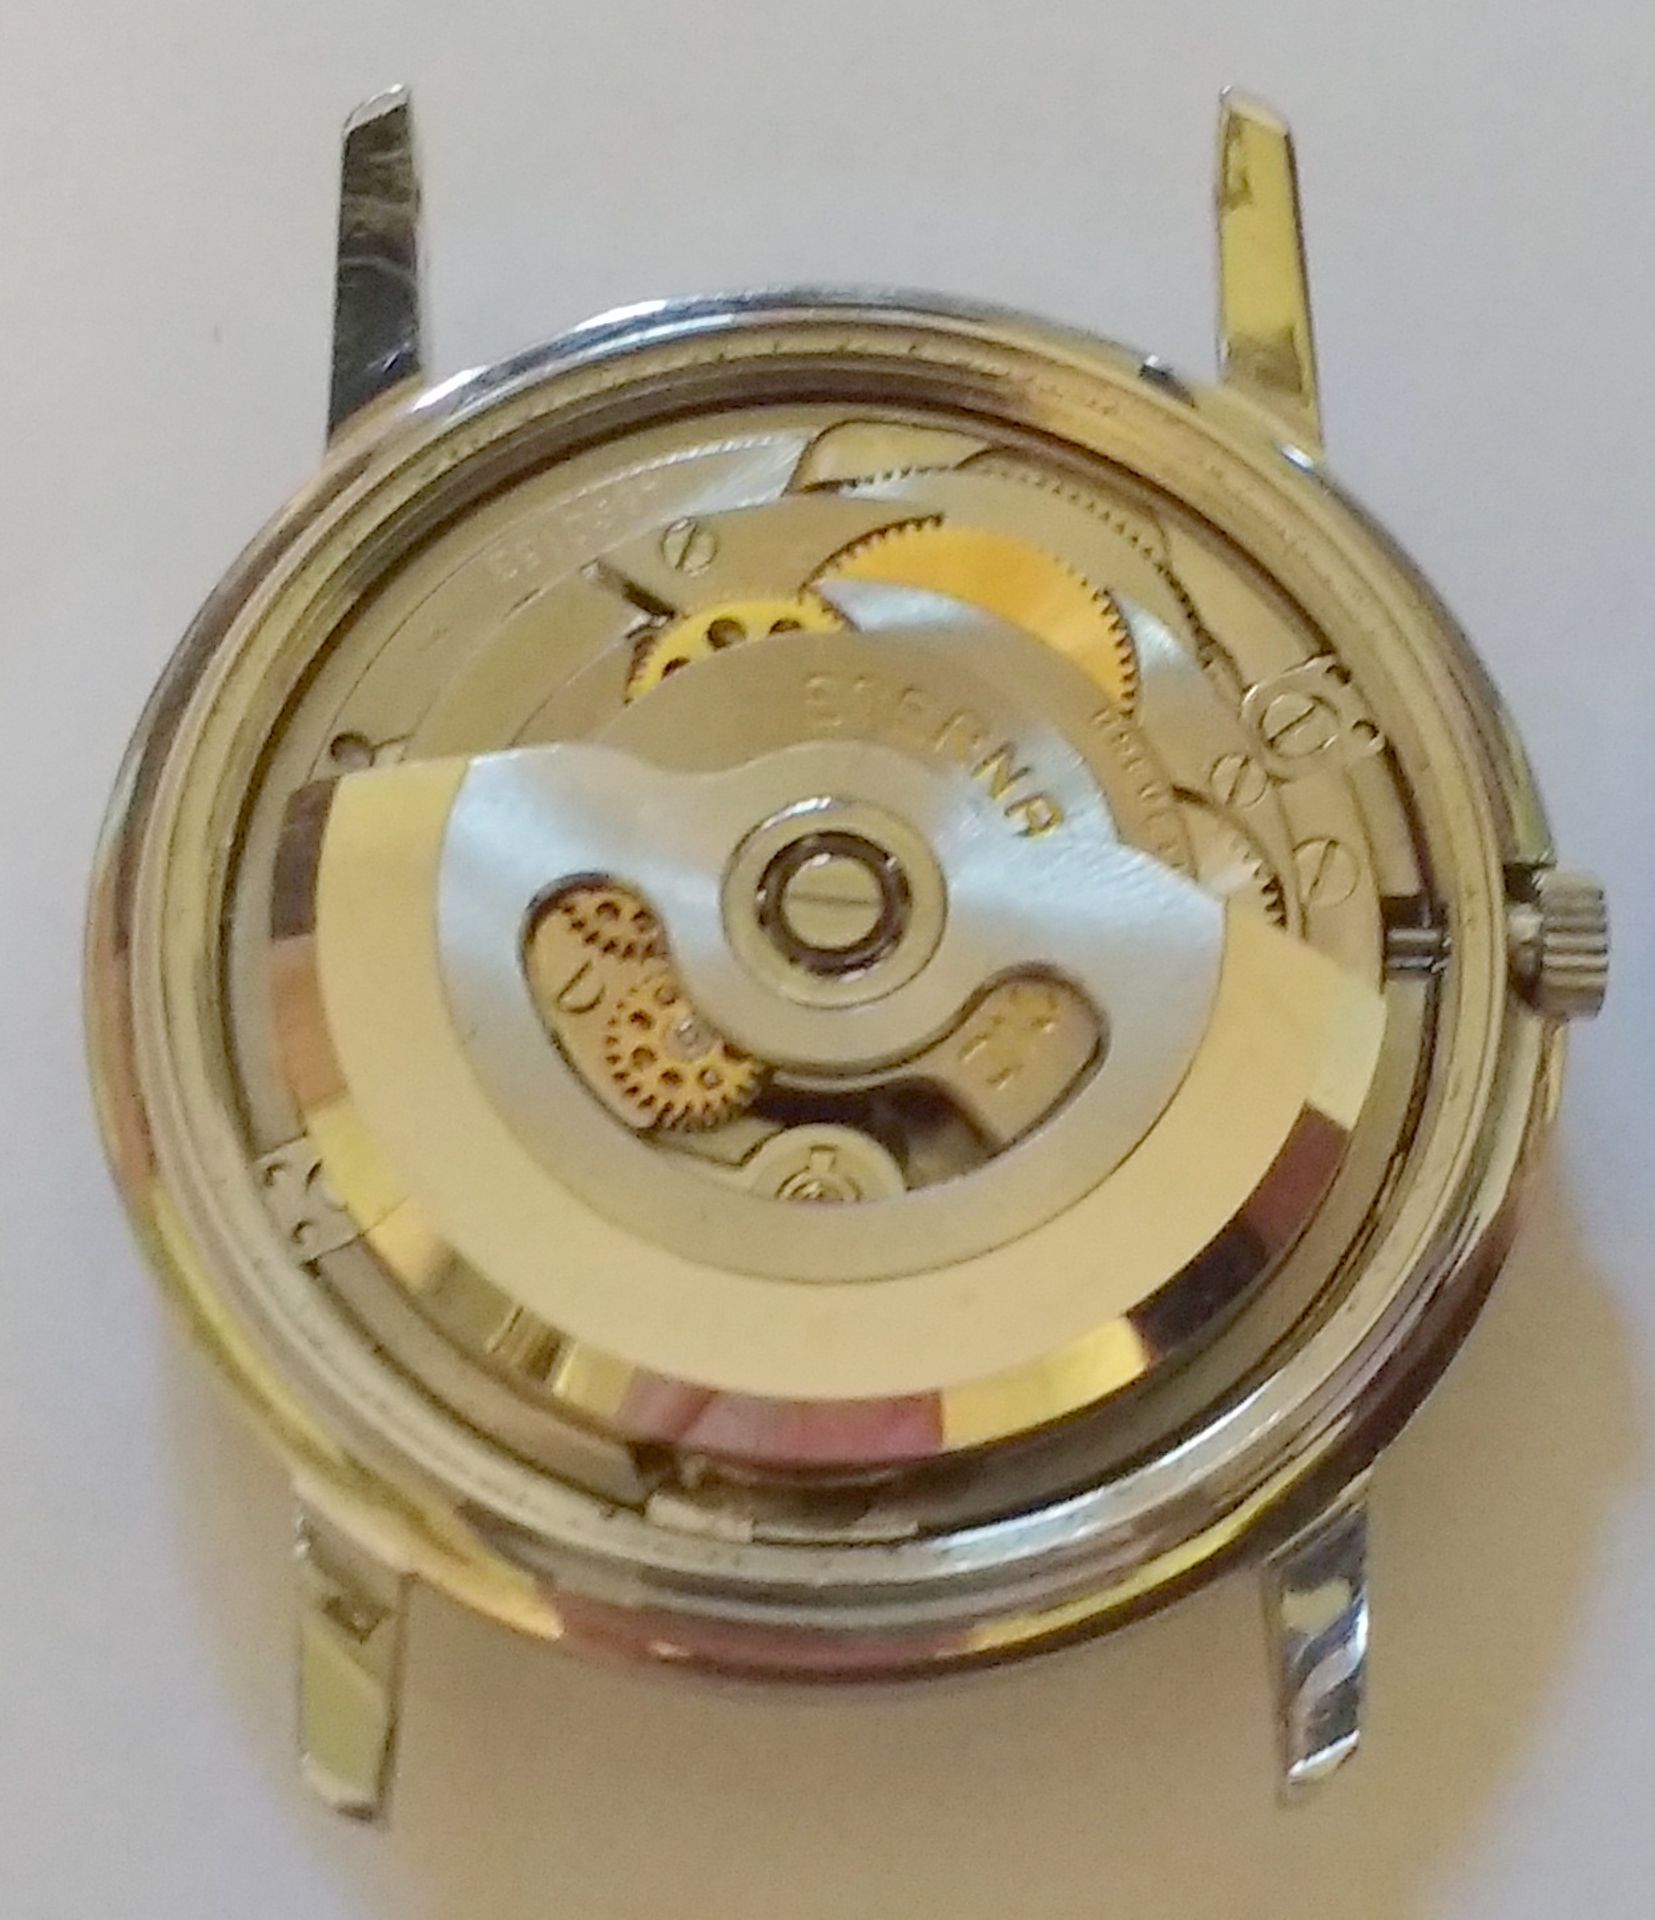 Vintage Eternamatic Automatic Gentleman's Wristwatch With Date - Image 5 of 7